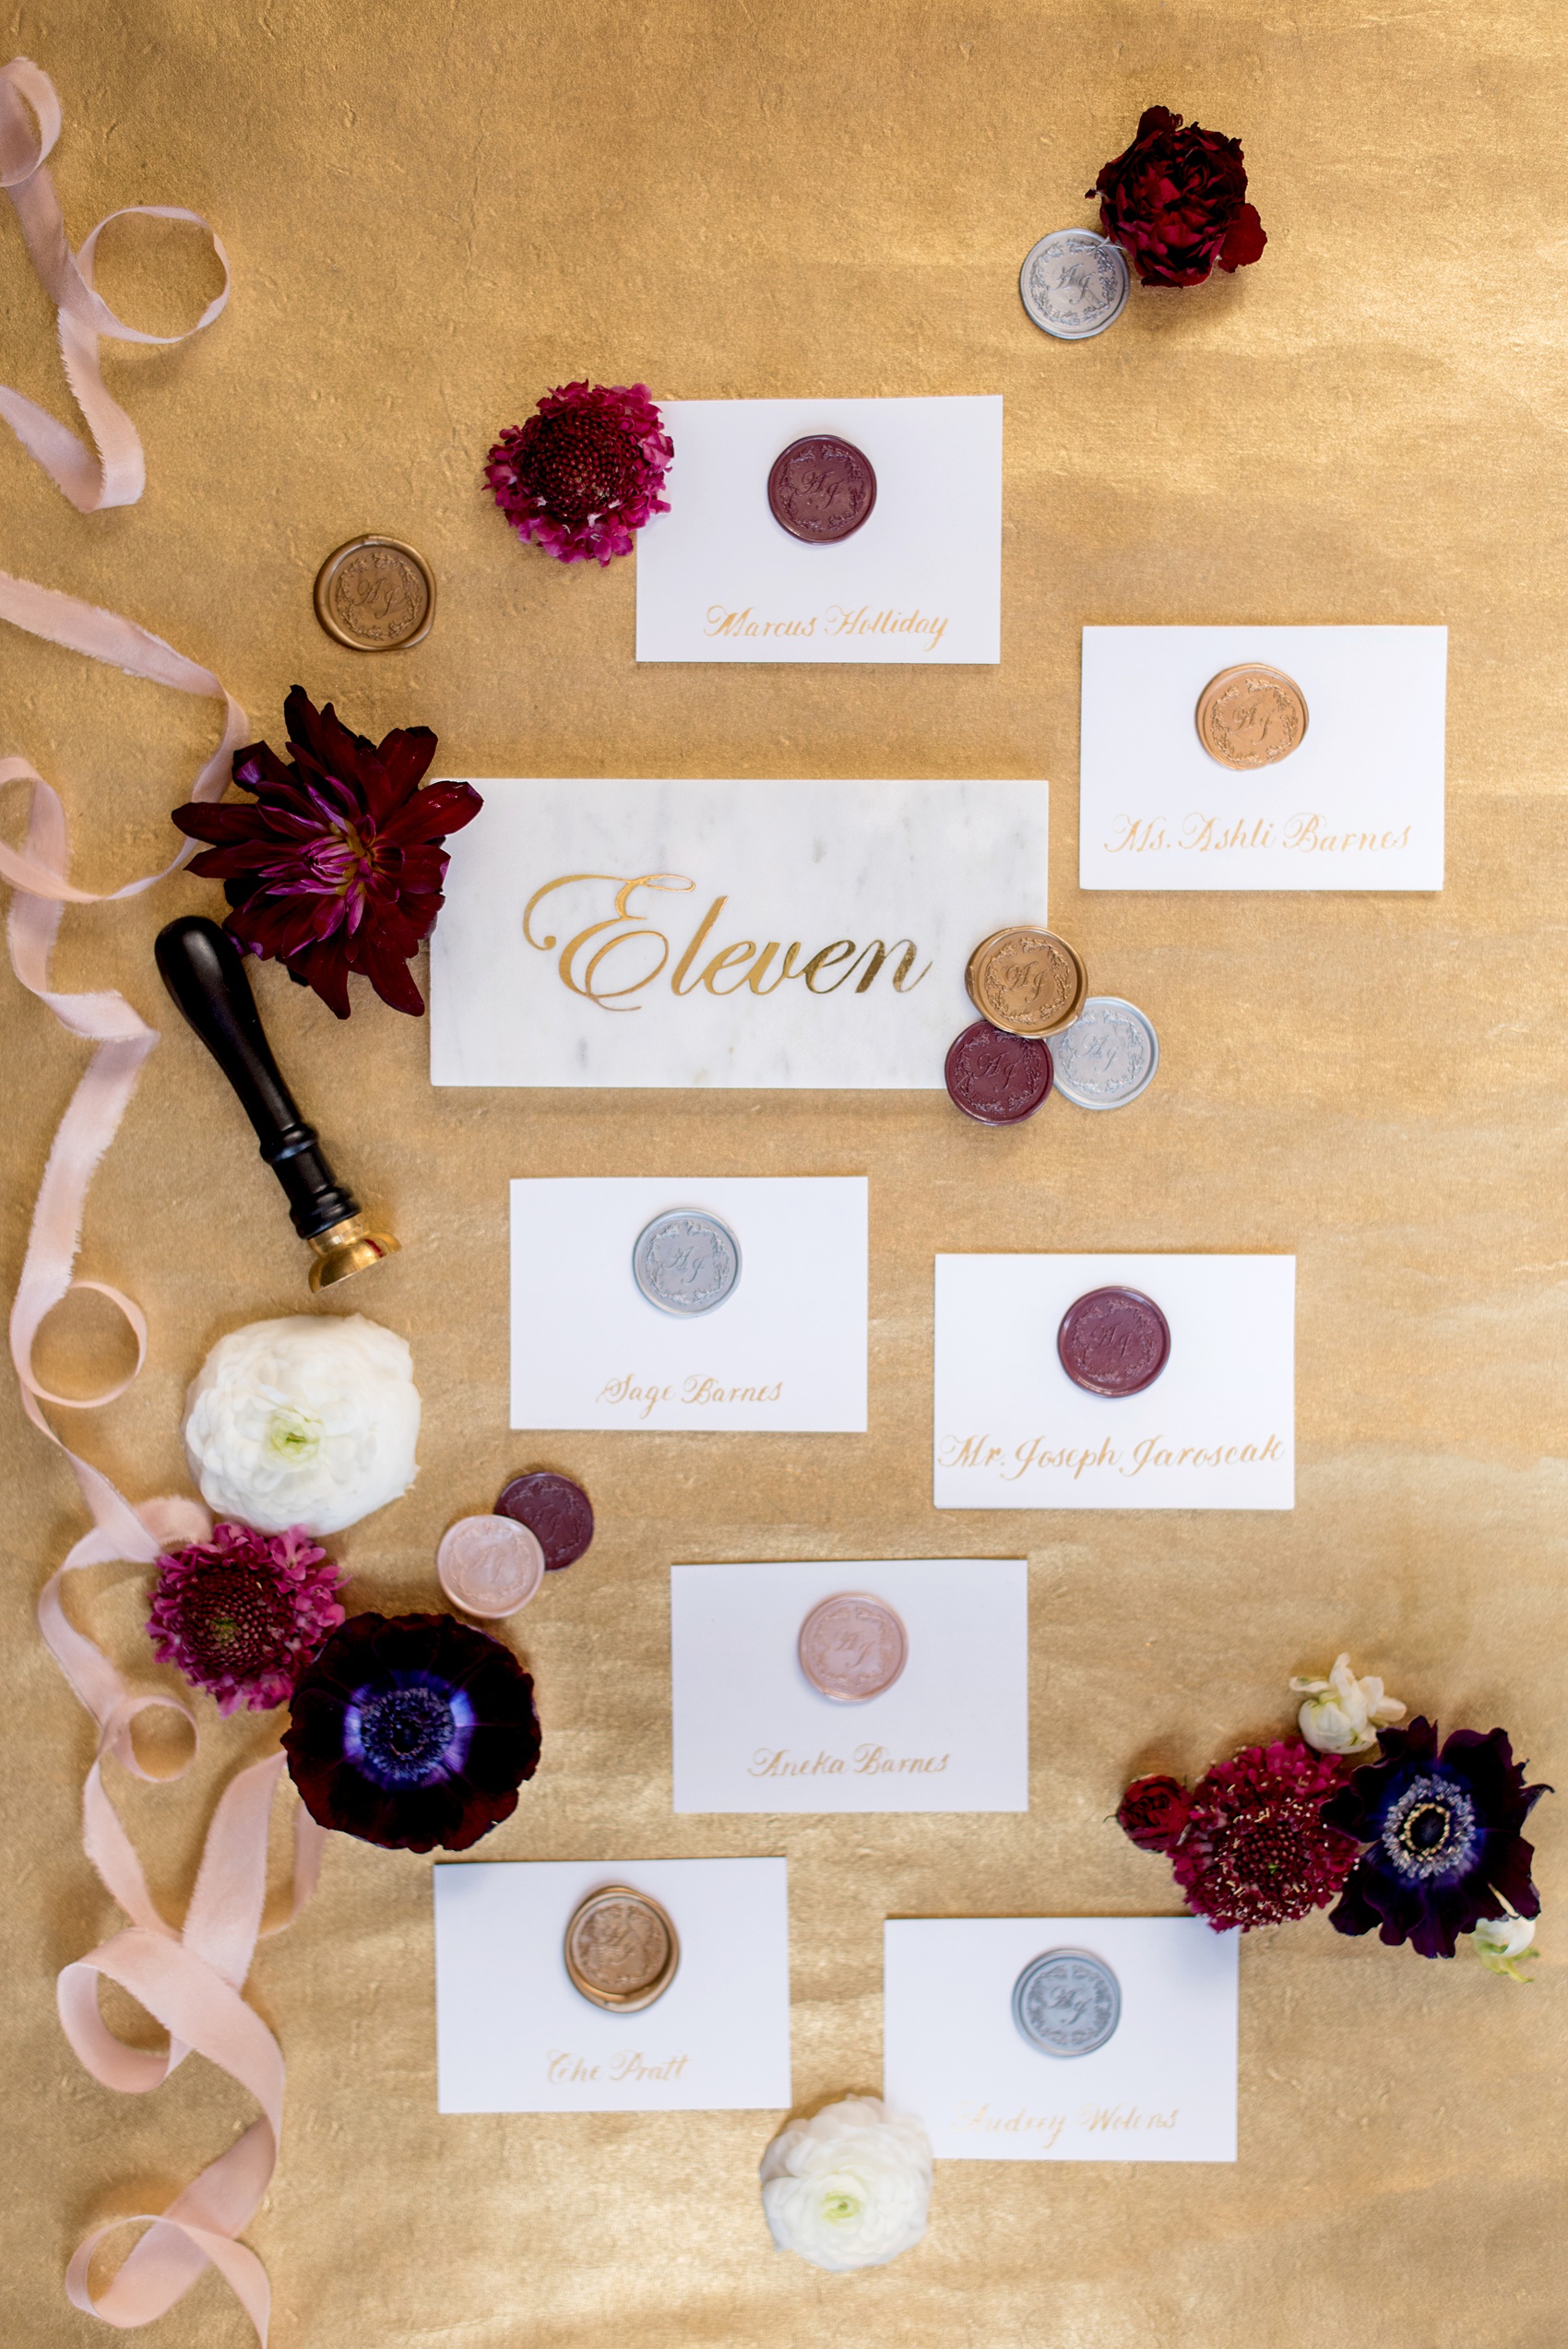 A fall wedding with burgundy, dusty rose and grey details. Mikkel Paige Photography, photographer in Greenville NC and Raleigh, captured this wedding at Rock Springs Center, planned by @vivalevent. The couple's escort cards had names in gold calligraphy with the couple's custom wax seal. Marble tiles showed gold table numbers in script. Click through for details! #mikkelpaige NCwedding #northcarolinawedding #southernwedding #letterpress #weddinginvitation #stationery #waxseal #tablenumbers